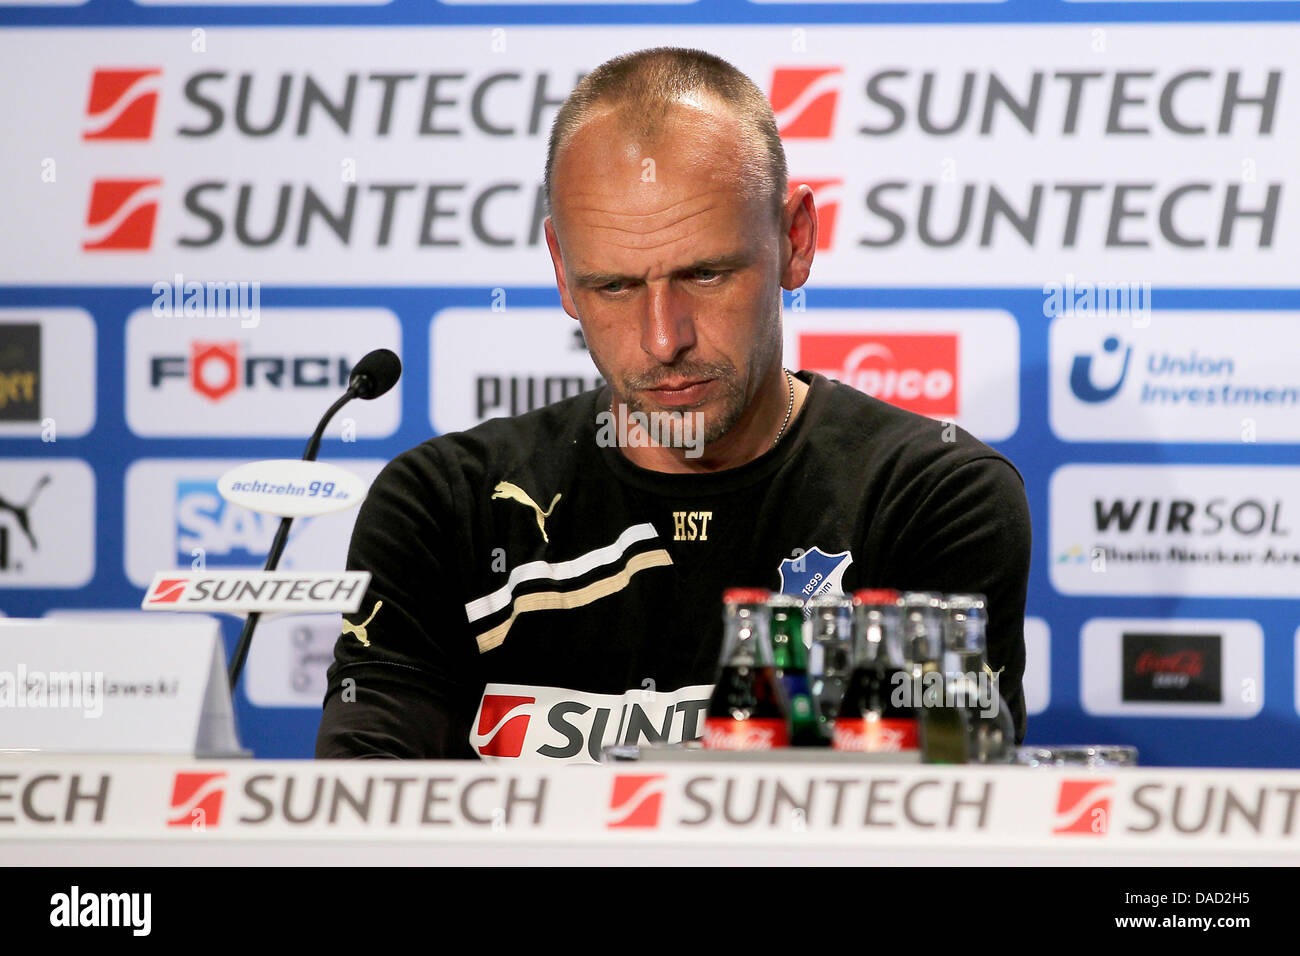 Hoffenheim's head coach Holger Stanislawski is pictured during the press conference of the German Bundesliga soccer match between TSG 1899 Hoffenheim and FC Bayern Munich at Rhein-Neckar-Arena in Sinsheim, Germany, 01 October 2011. The match ended in a tie 0-0.Photo: Revierfoto Stock Photo